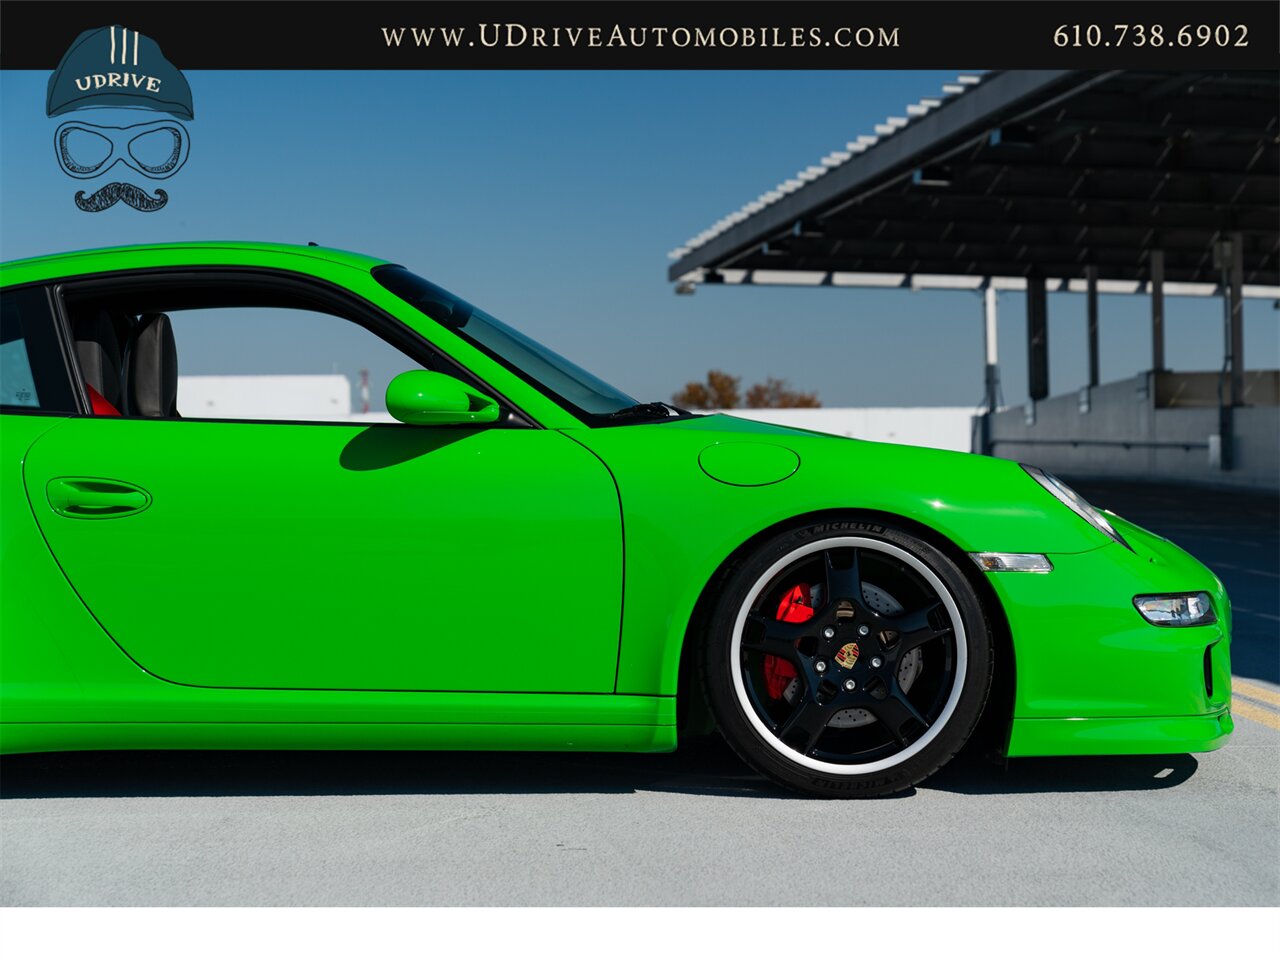 2006 Porsche 911 Carrera 4S  997 PTS Signal Green 6Sp Sport Sts Spt Chrono Spt Exhst - Photo 17 - West Chester, PA 19382